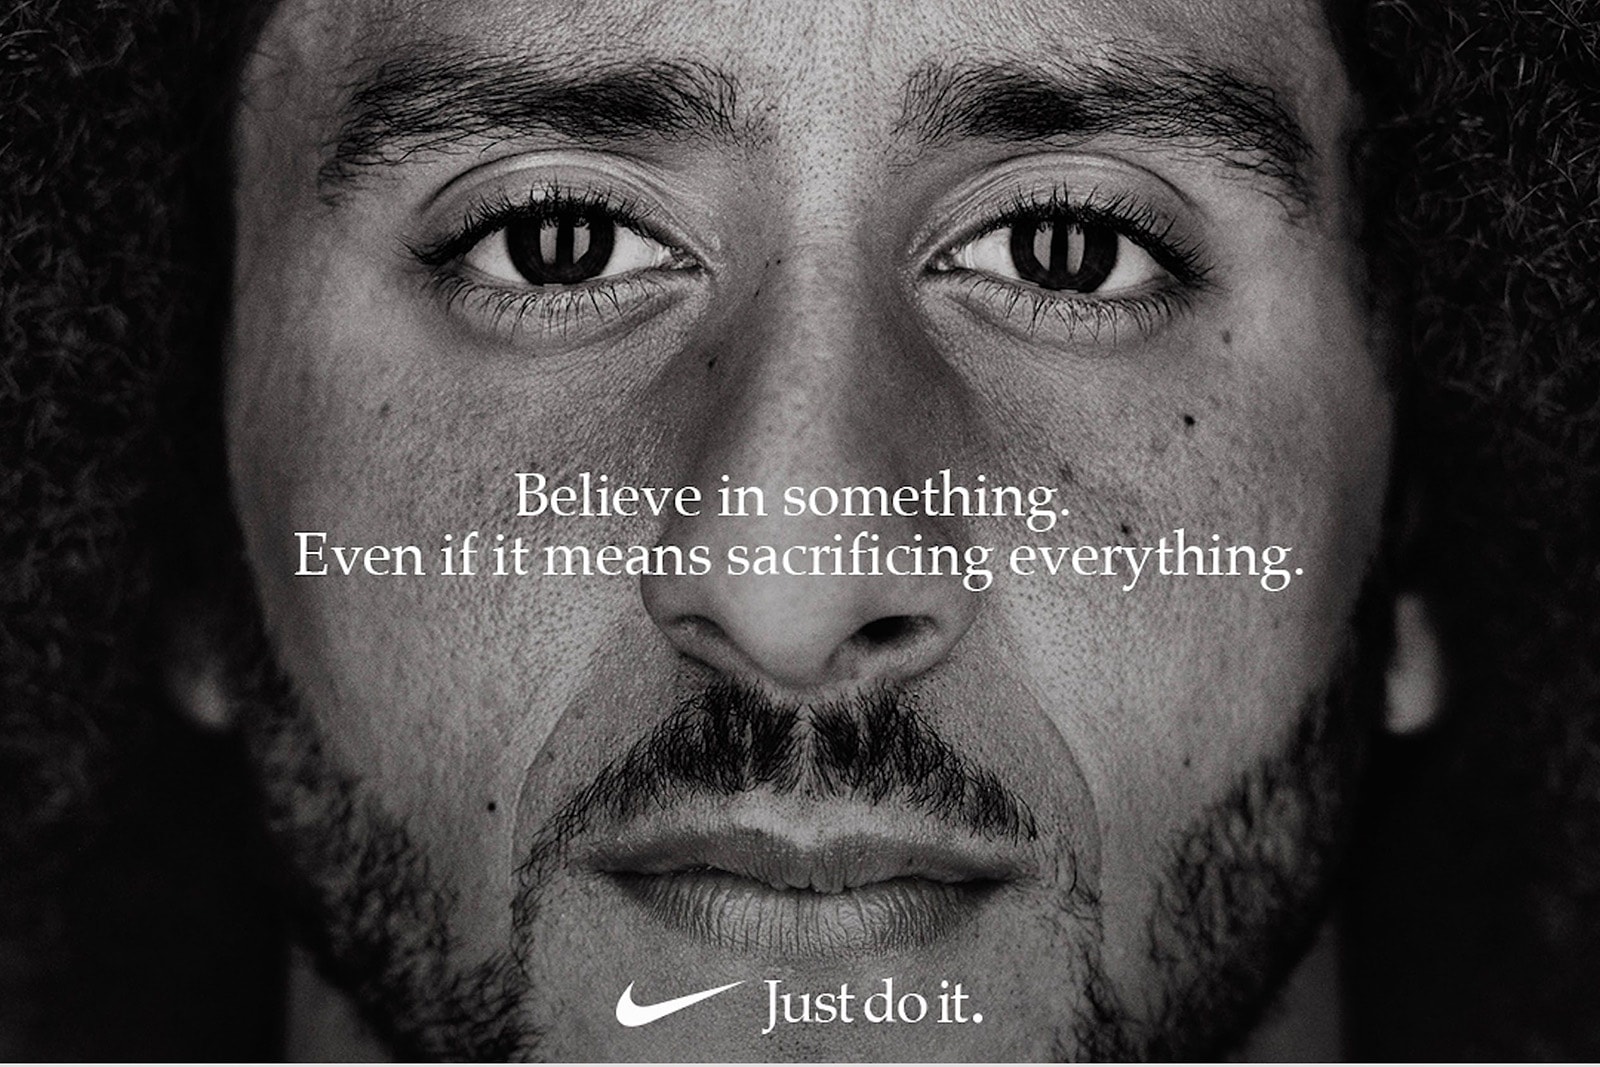 Nike Colin Kaepernick Advert Sold Out Items Cop Purchase Buy 61 Percent Merchandise